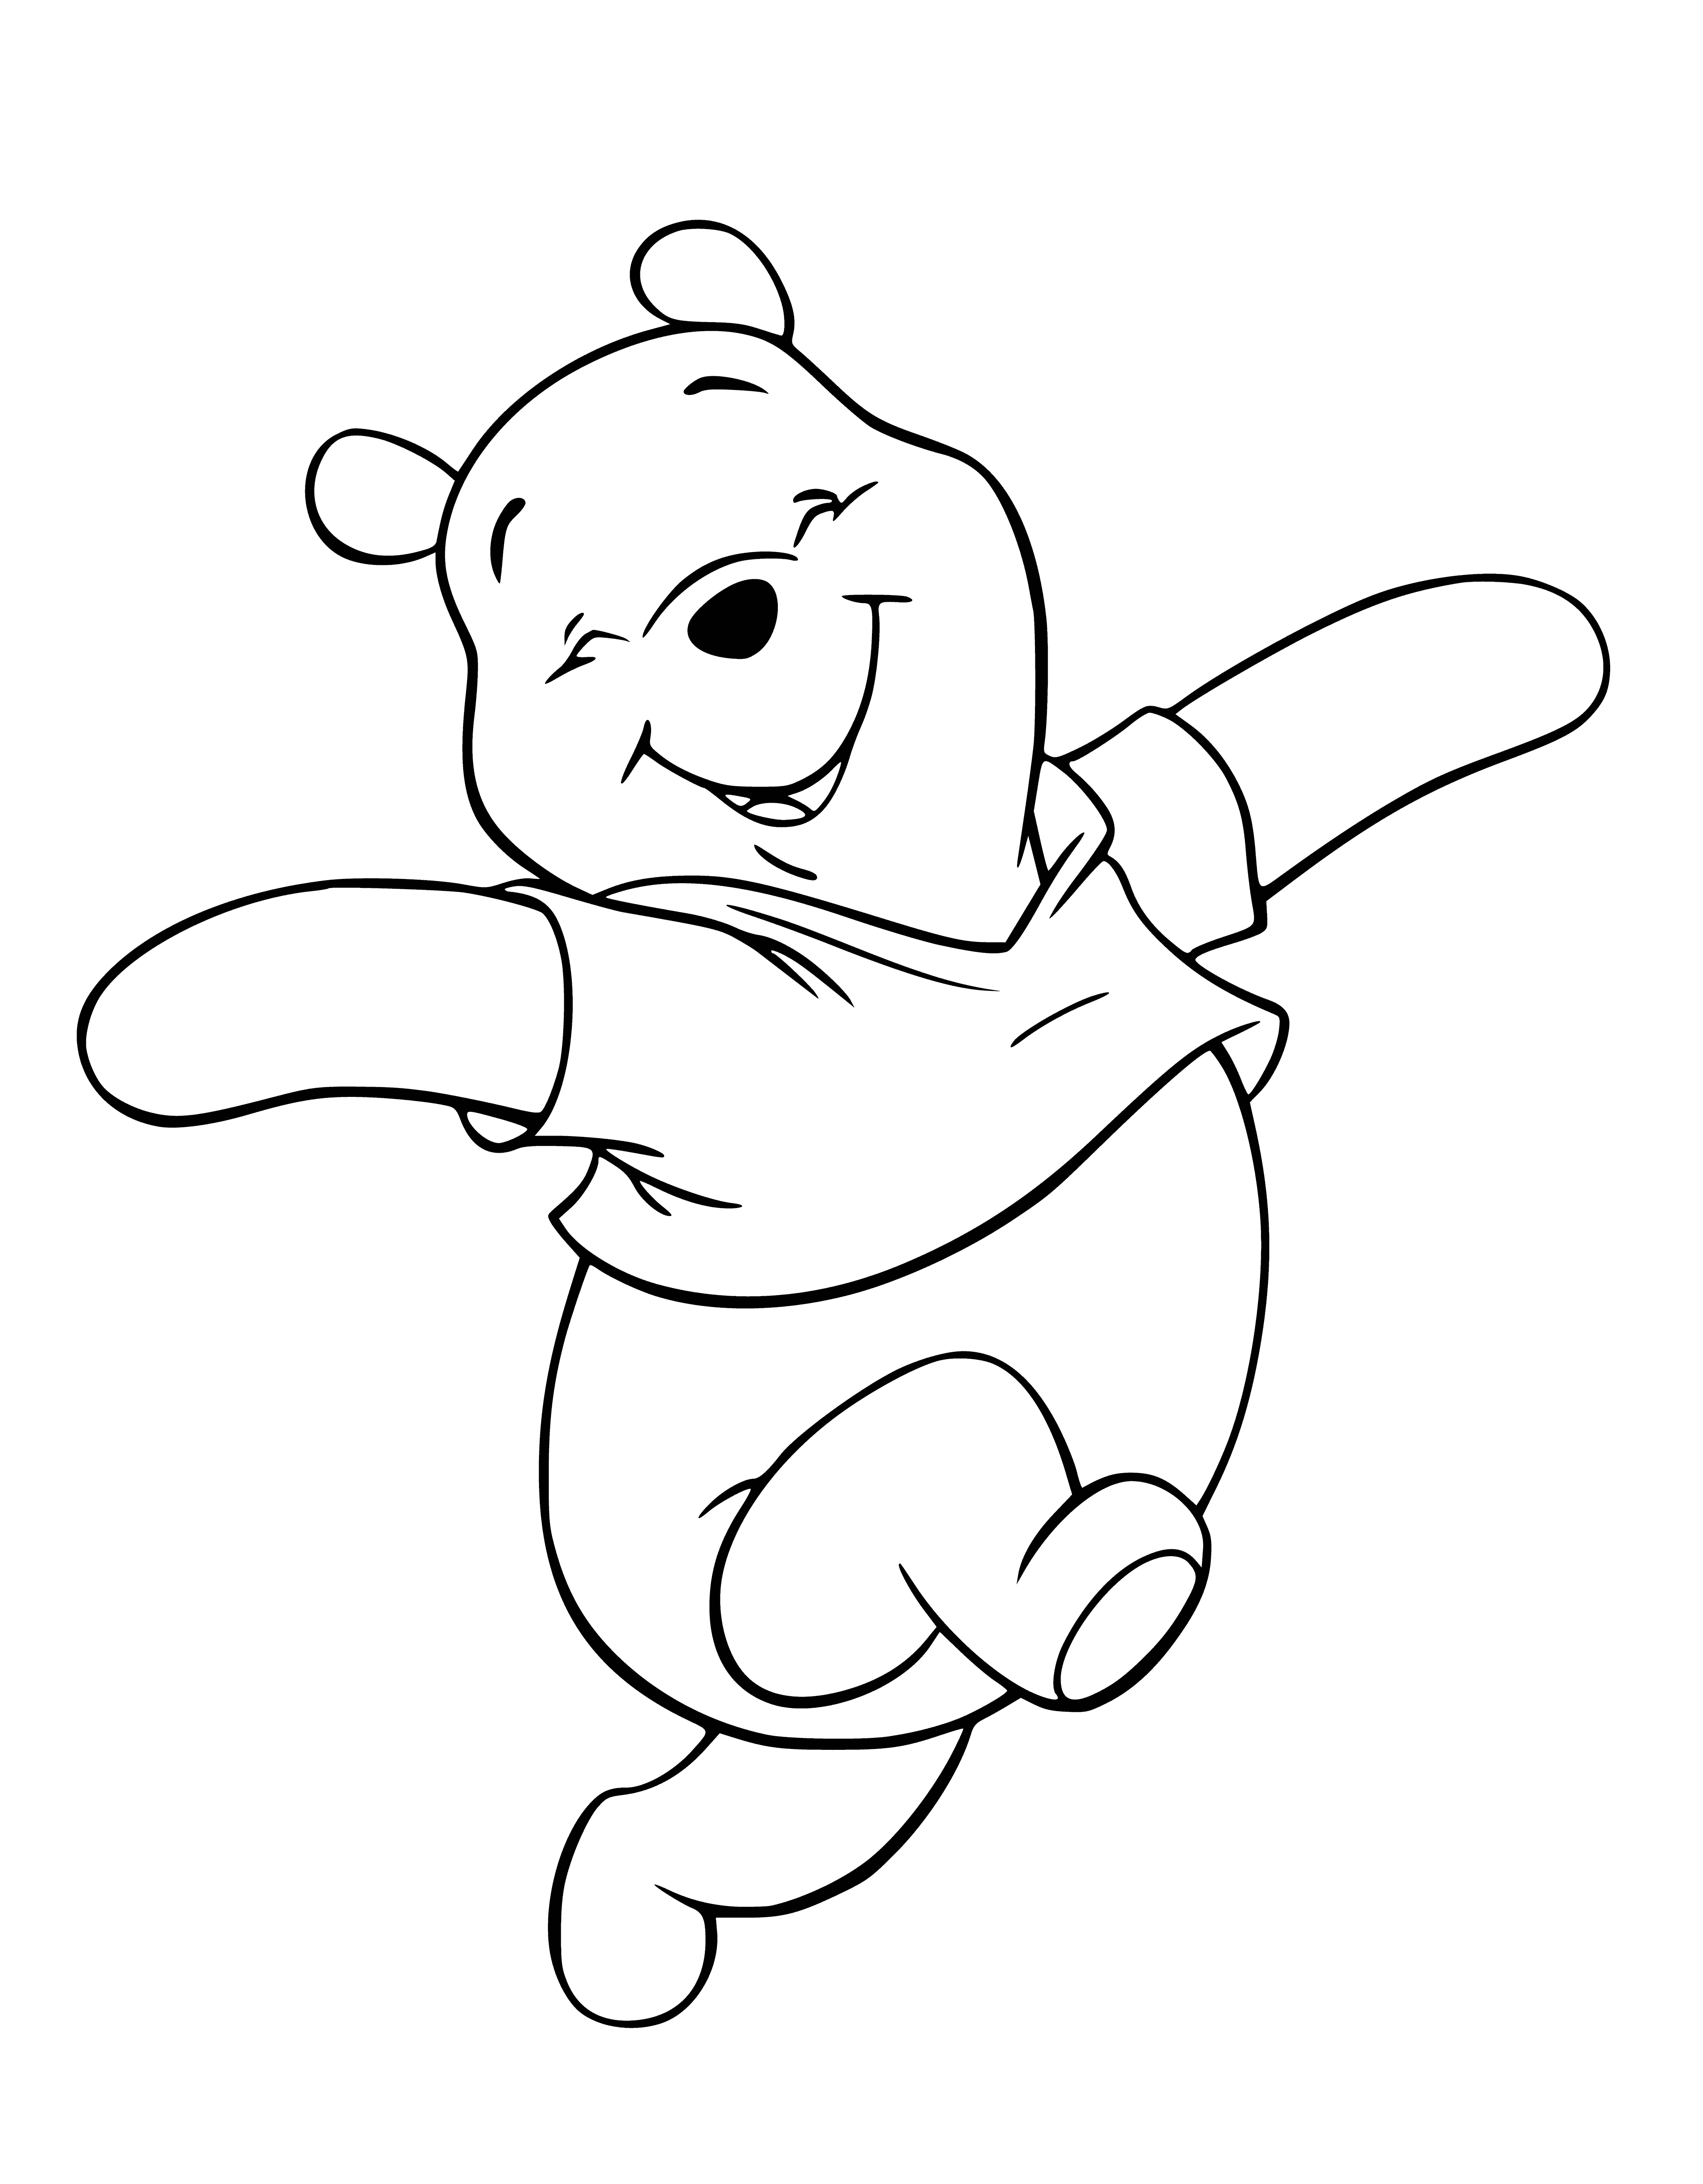 coloring page: Winnie the Pooh is a lovable, cuddly bear who loves honey & has many animal friends. He teaches us the value of "Doing Nothing."